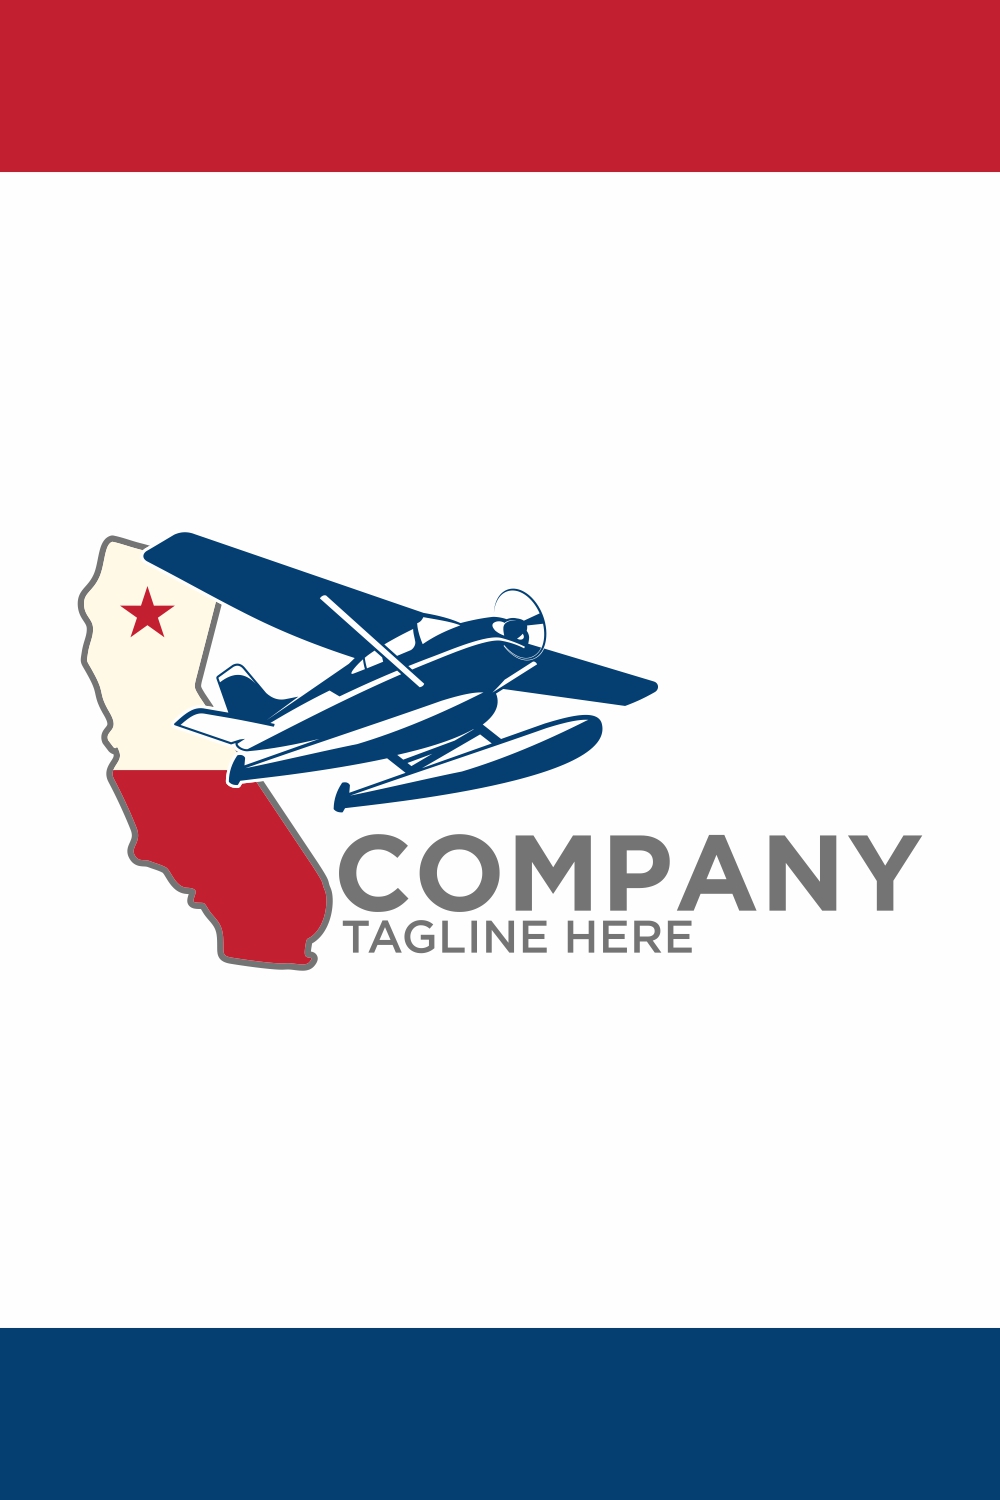 Plane logo design with flights in california - only 5$ pinterest preview image.